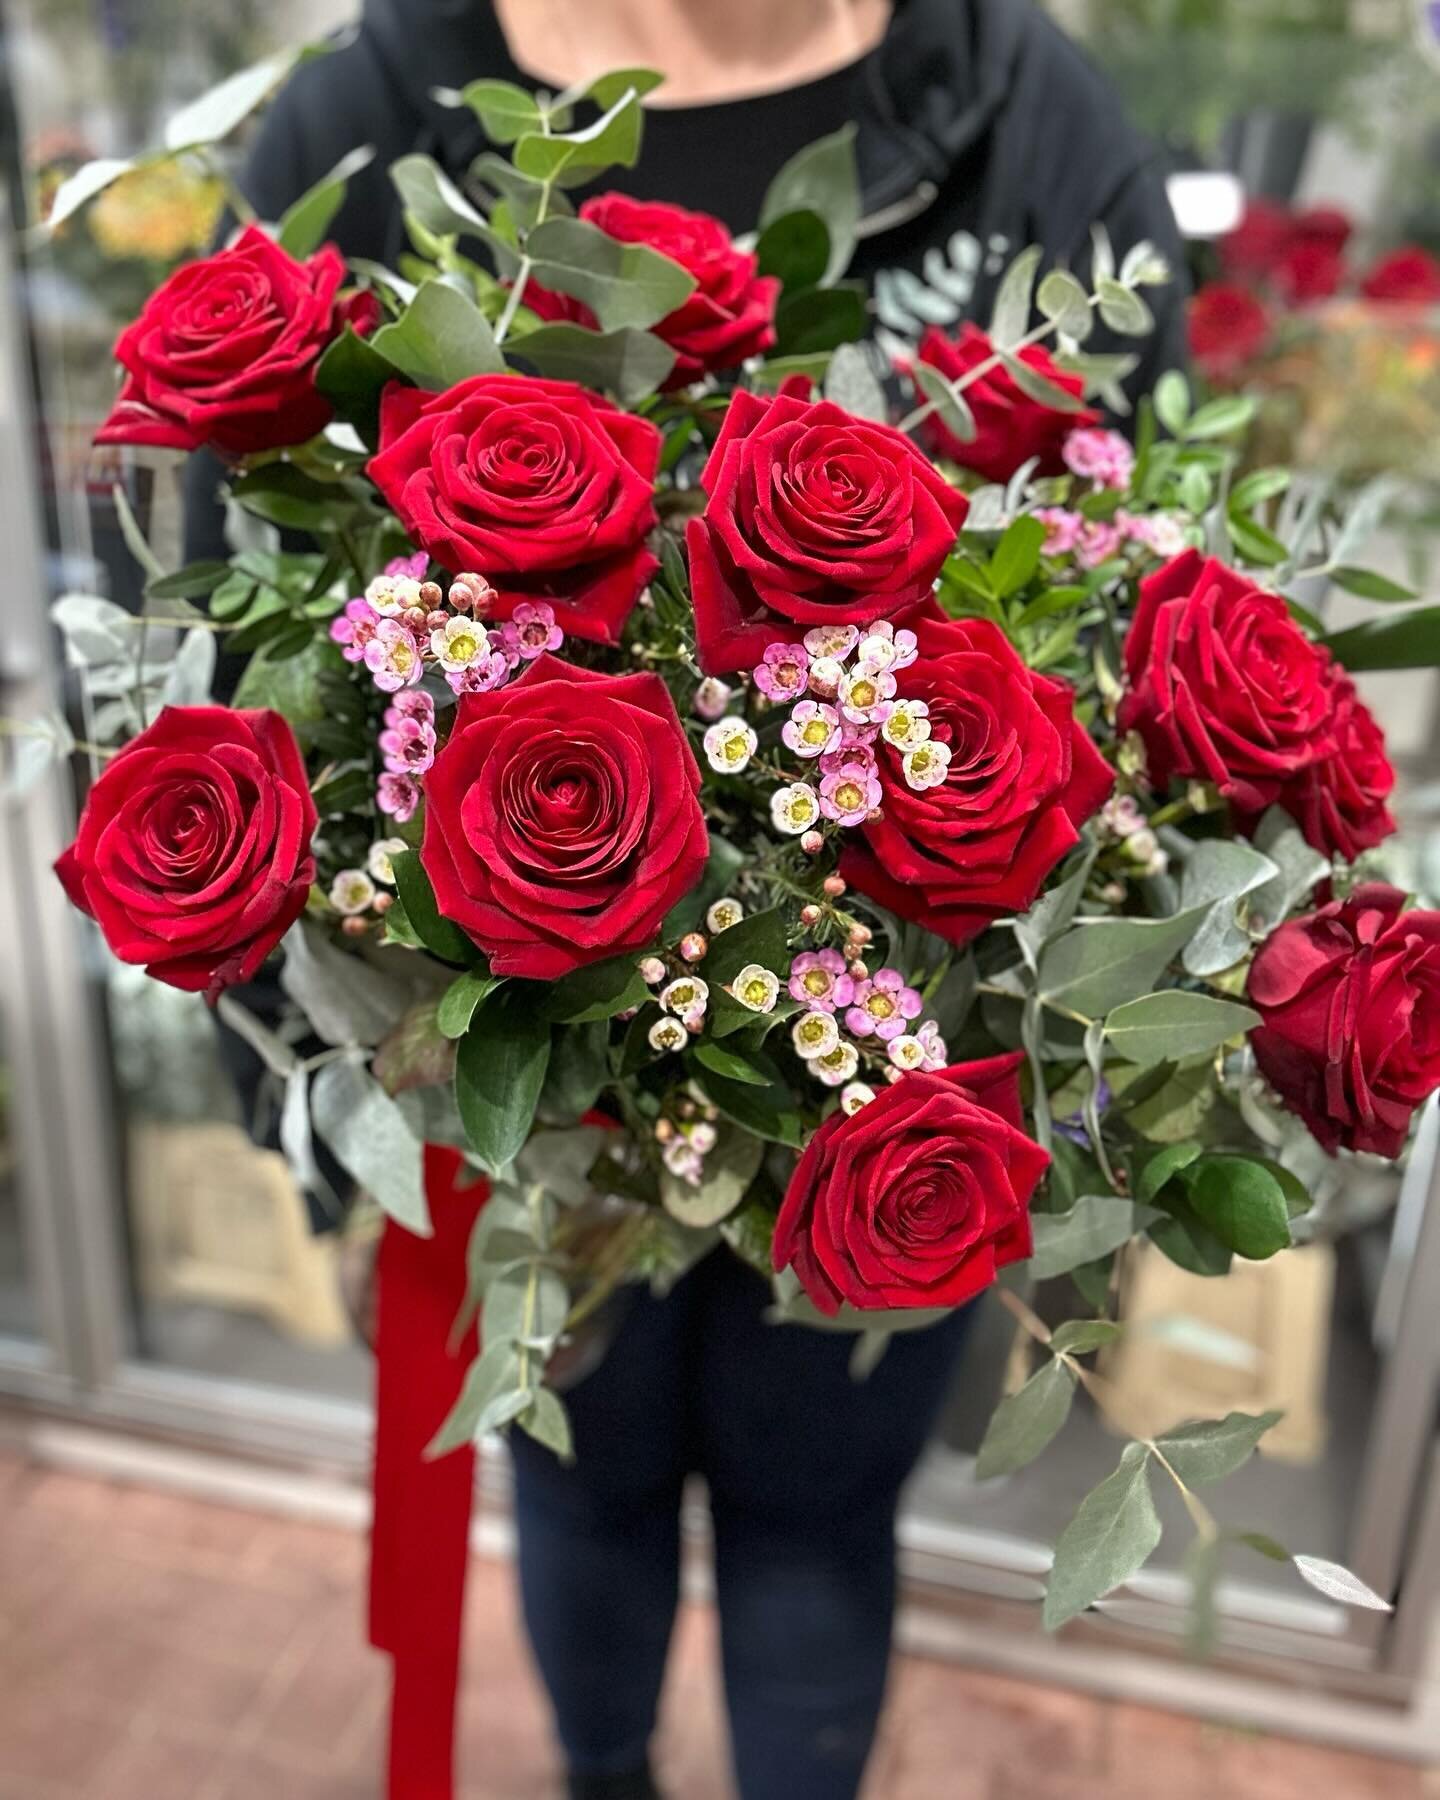 ❤️❤️❤️Valentine&rsquo;s Day is 1 week today ❤️❤️❤️, order asap to guarantee your collection or delivery slot with us, the earlier you order the best the prices will be as we&rsquo;ve pre ordered a lot of our roses 🌹&hellip;. We buy through auctions 